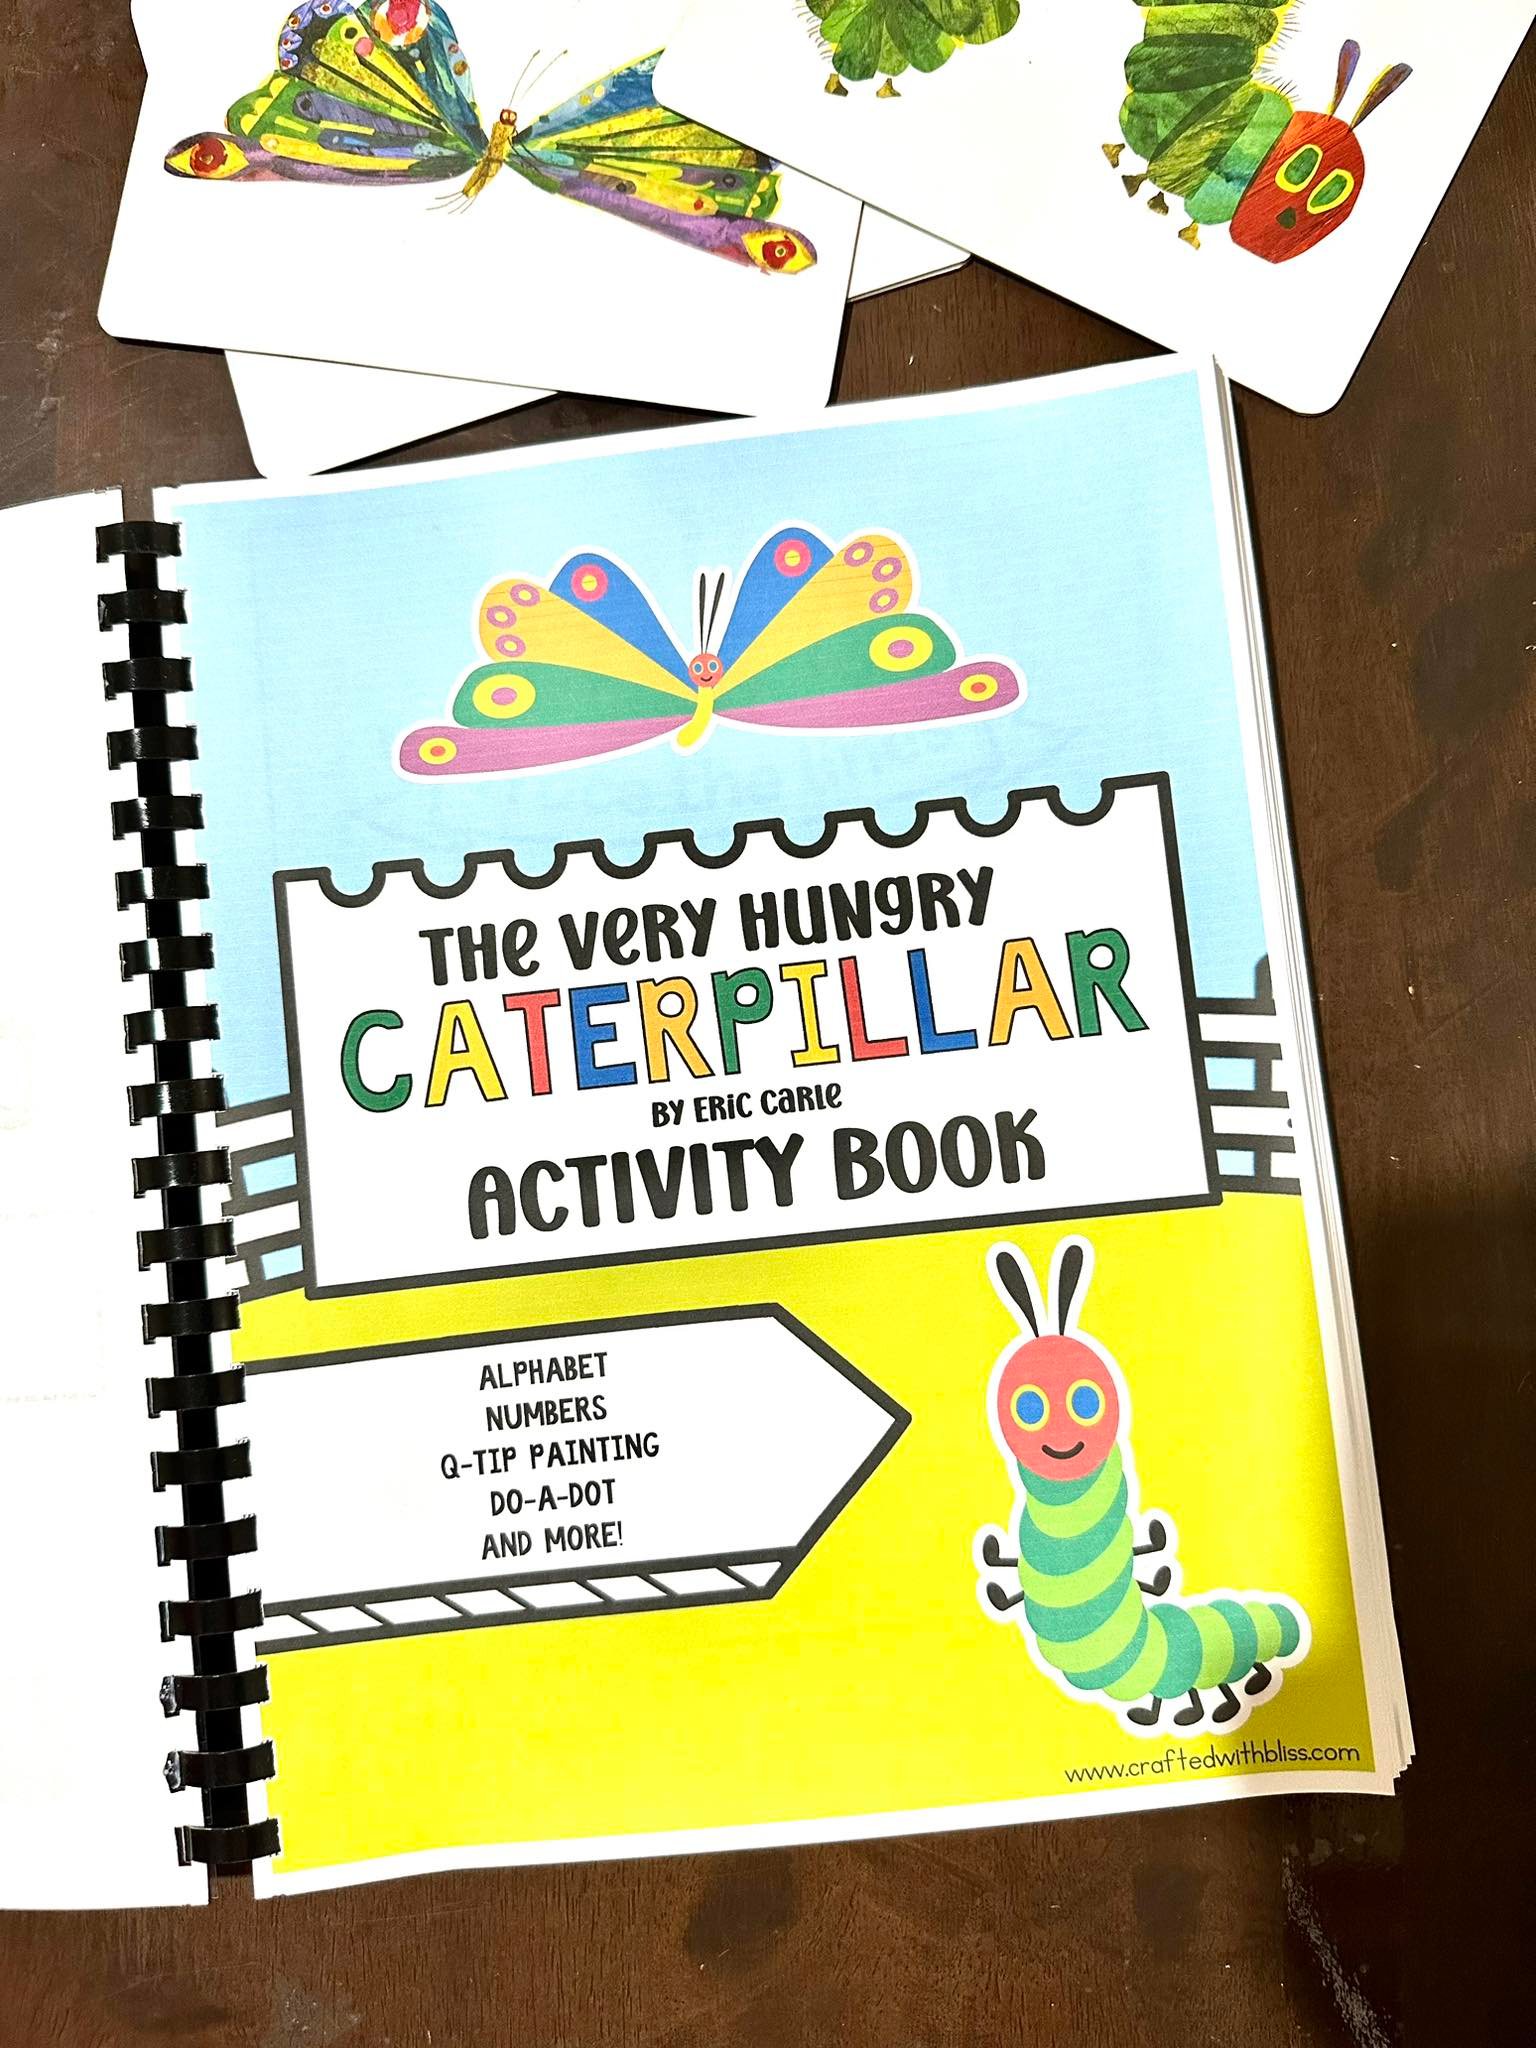 The Very Hungry Caterpillar Activity Book